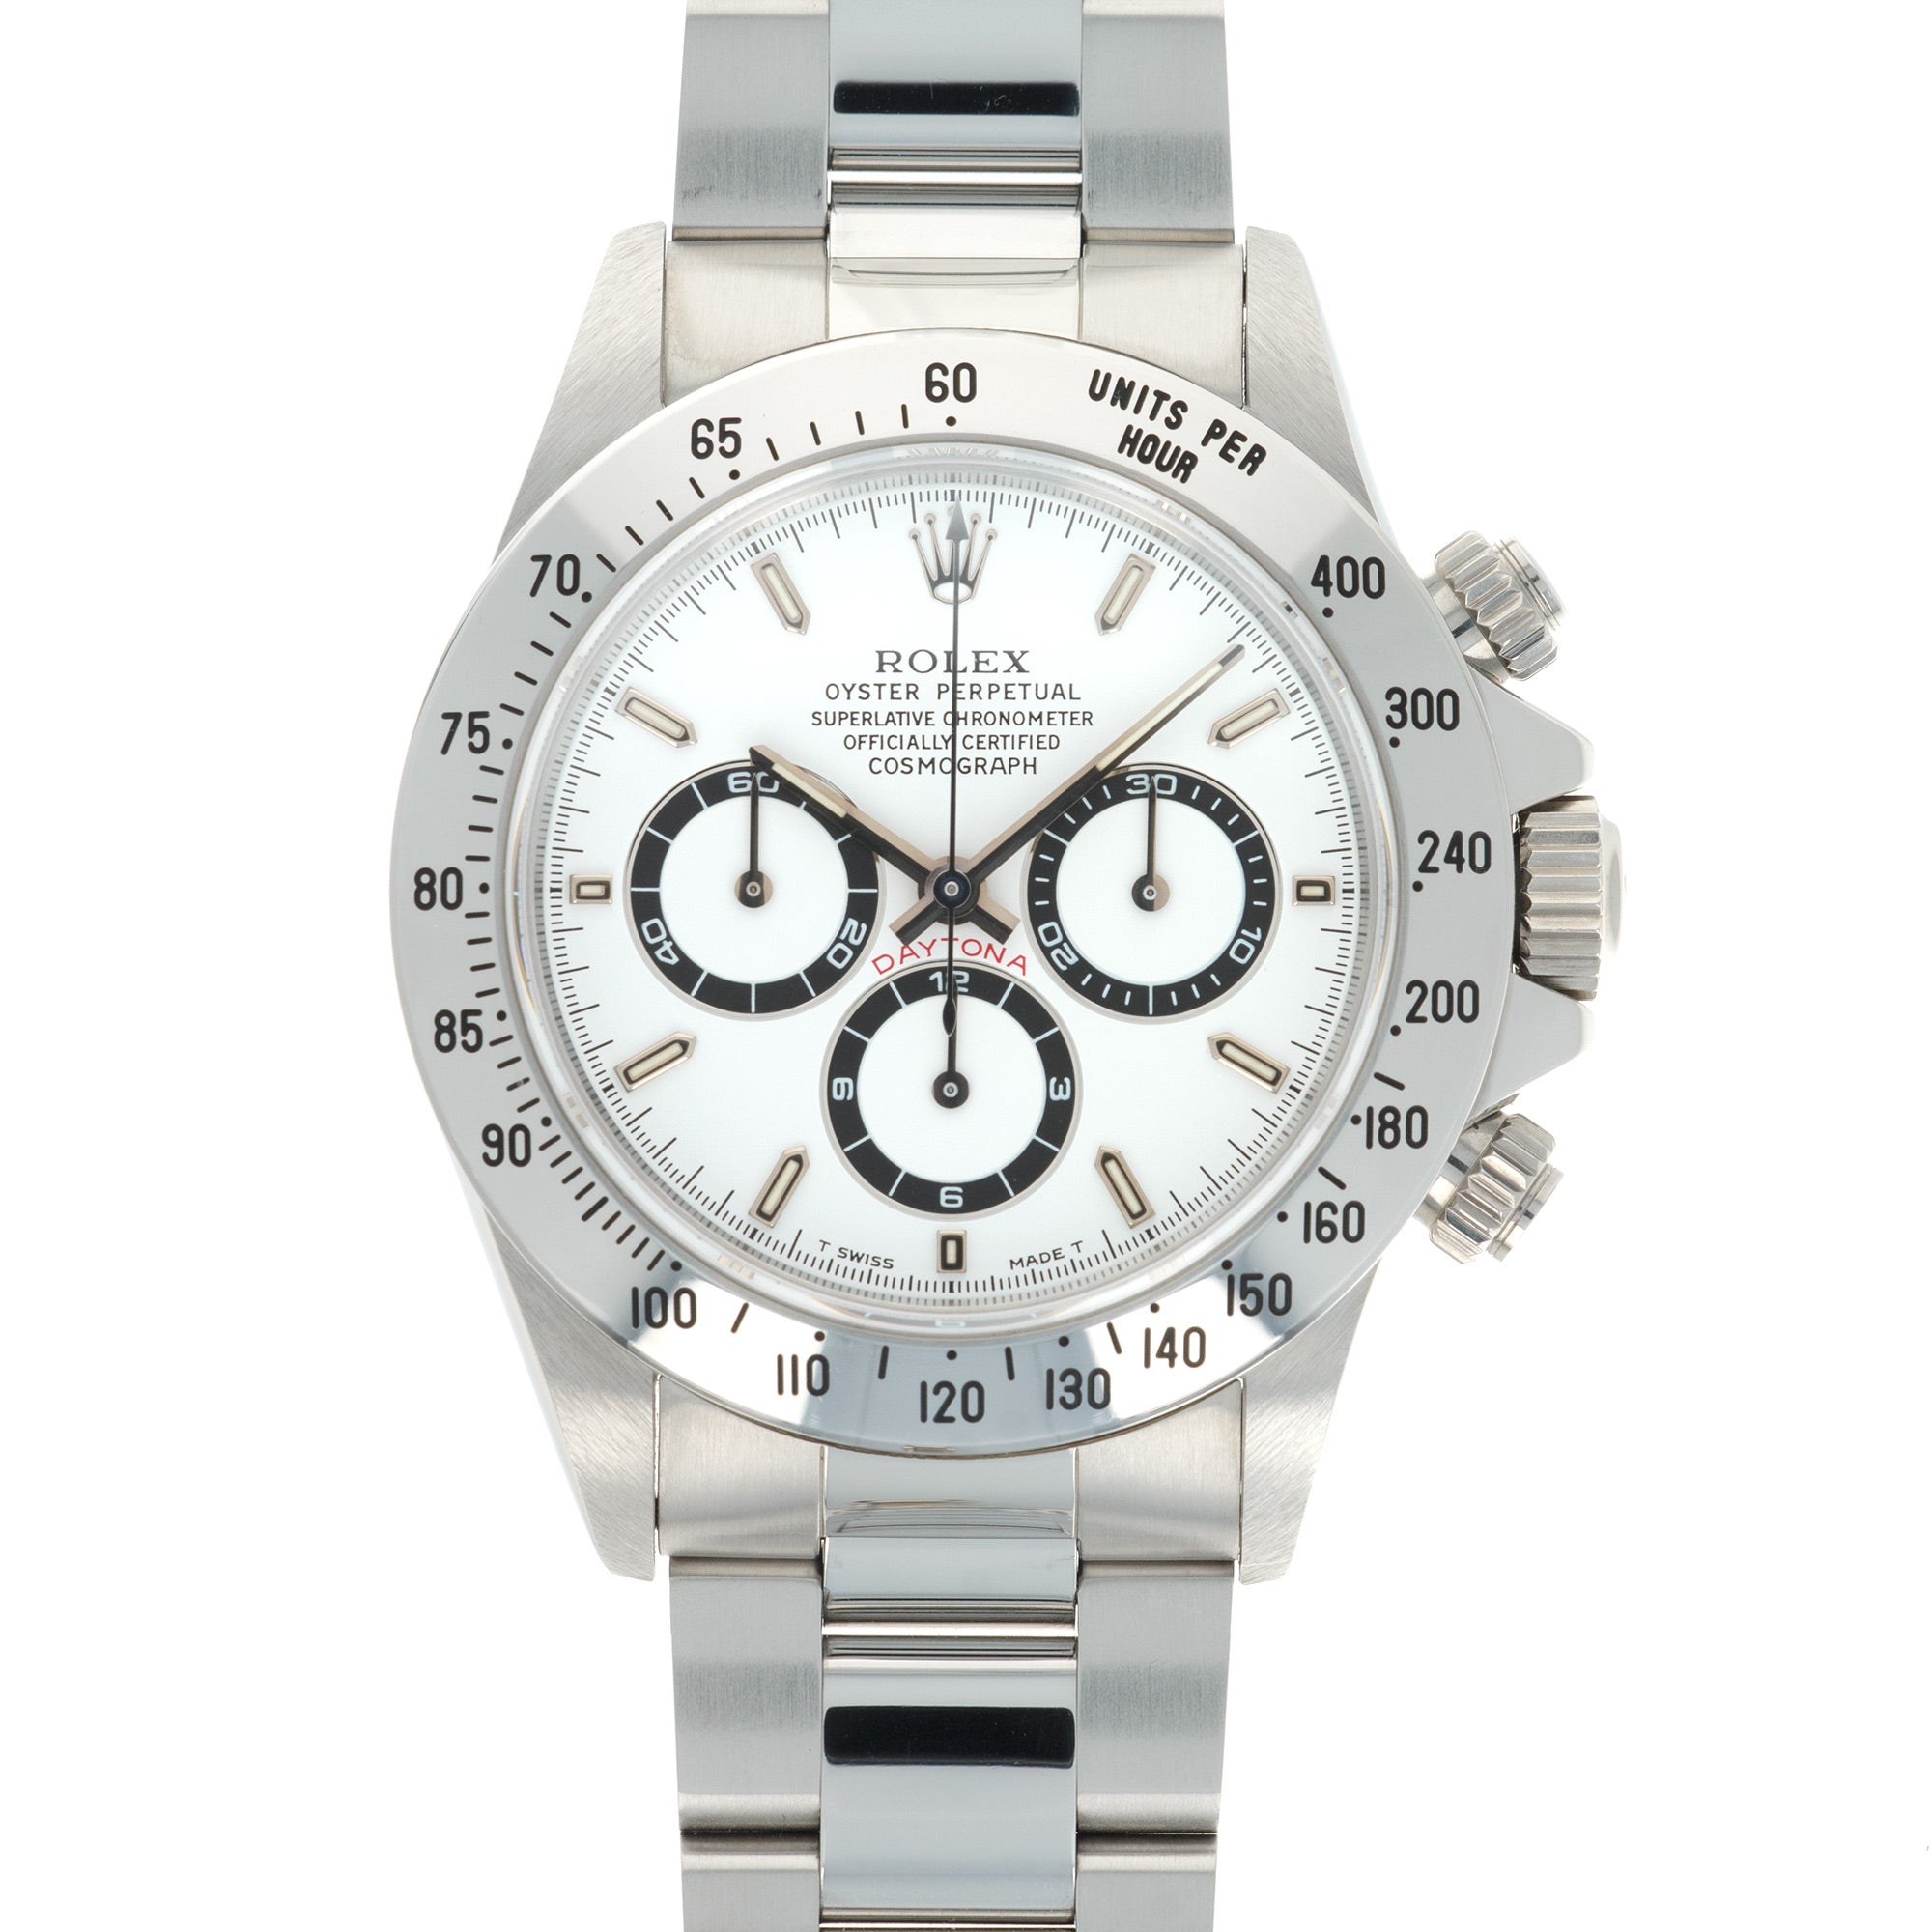 Rolex - Rolex Cosmograph Daytona Watch Ref. 16520 with Original Box and Papers, Completely New Old Stock - The Keystone Watches